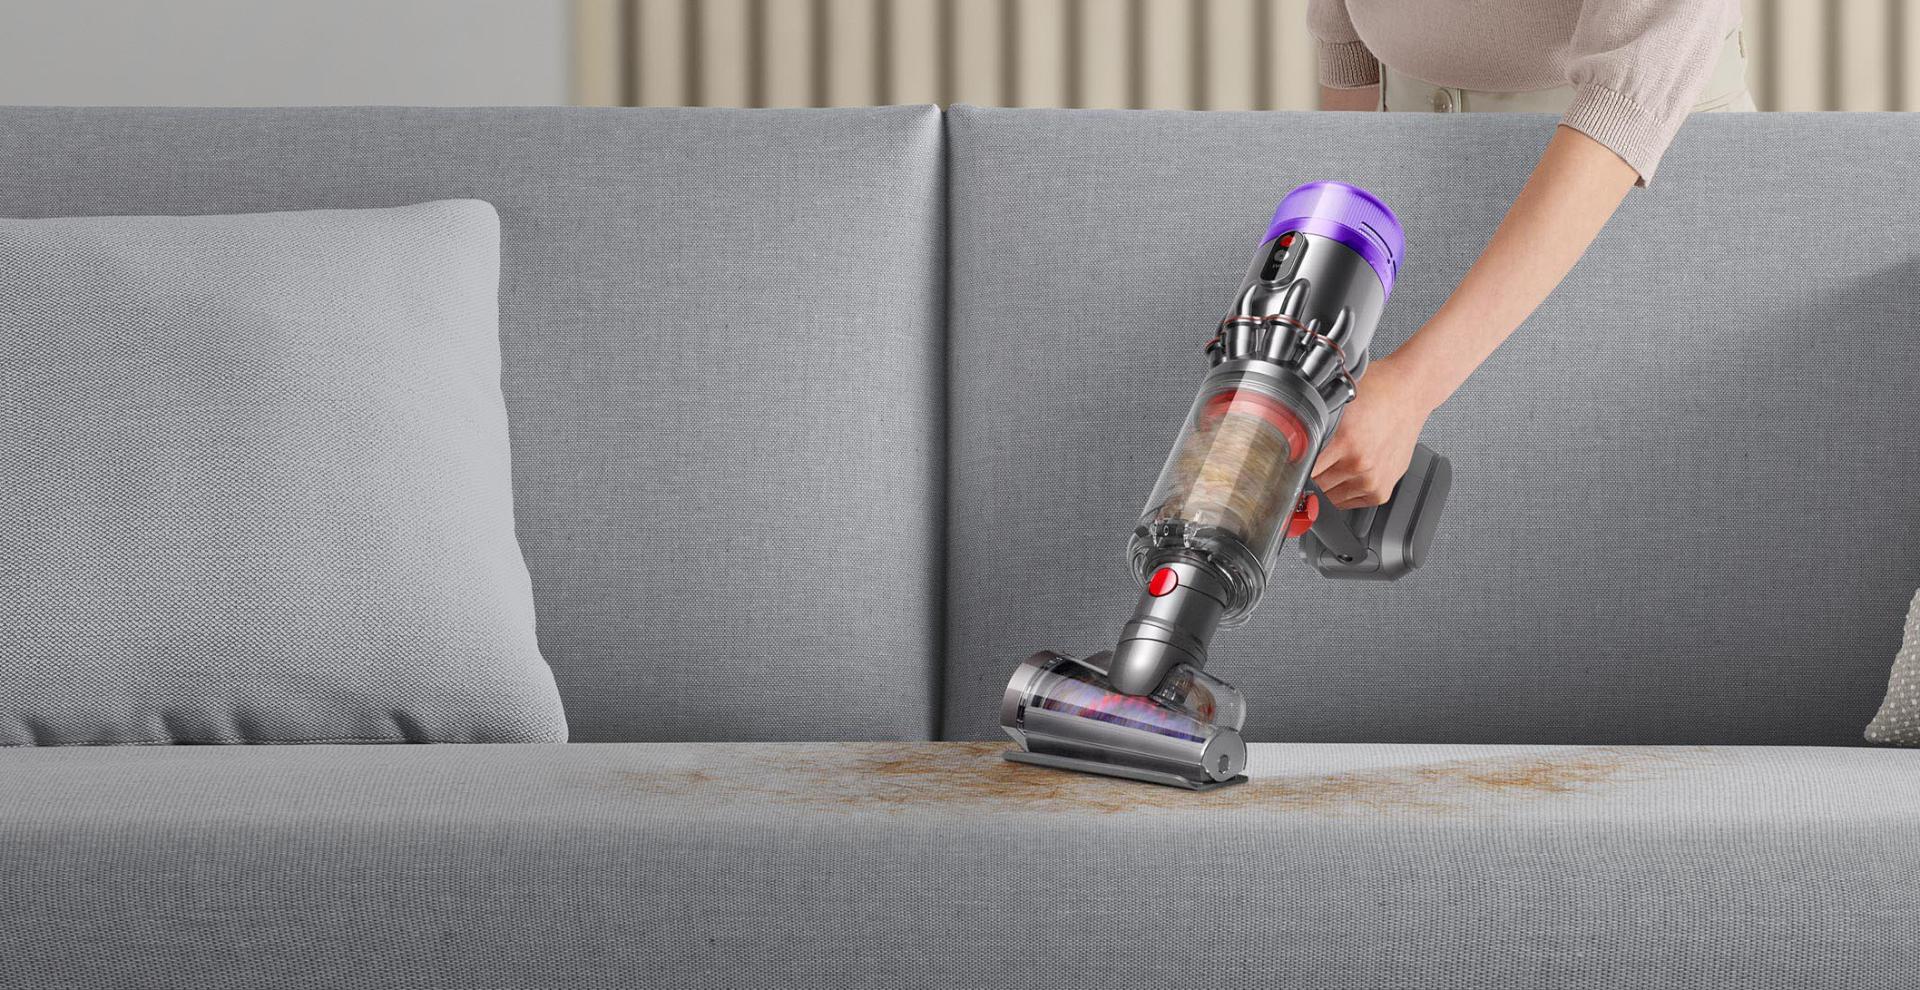 Dyson Humdinger vacuum being used to clean couch